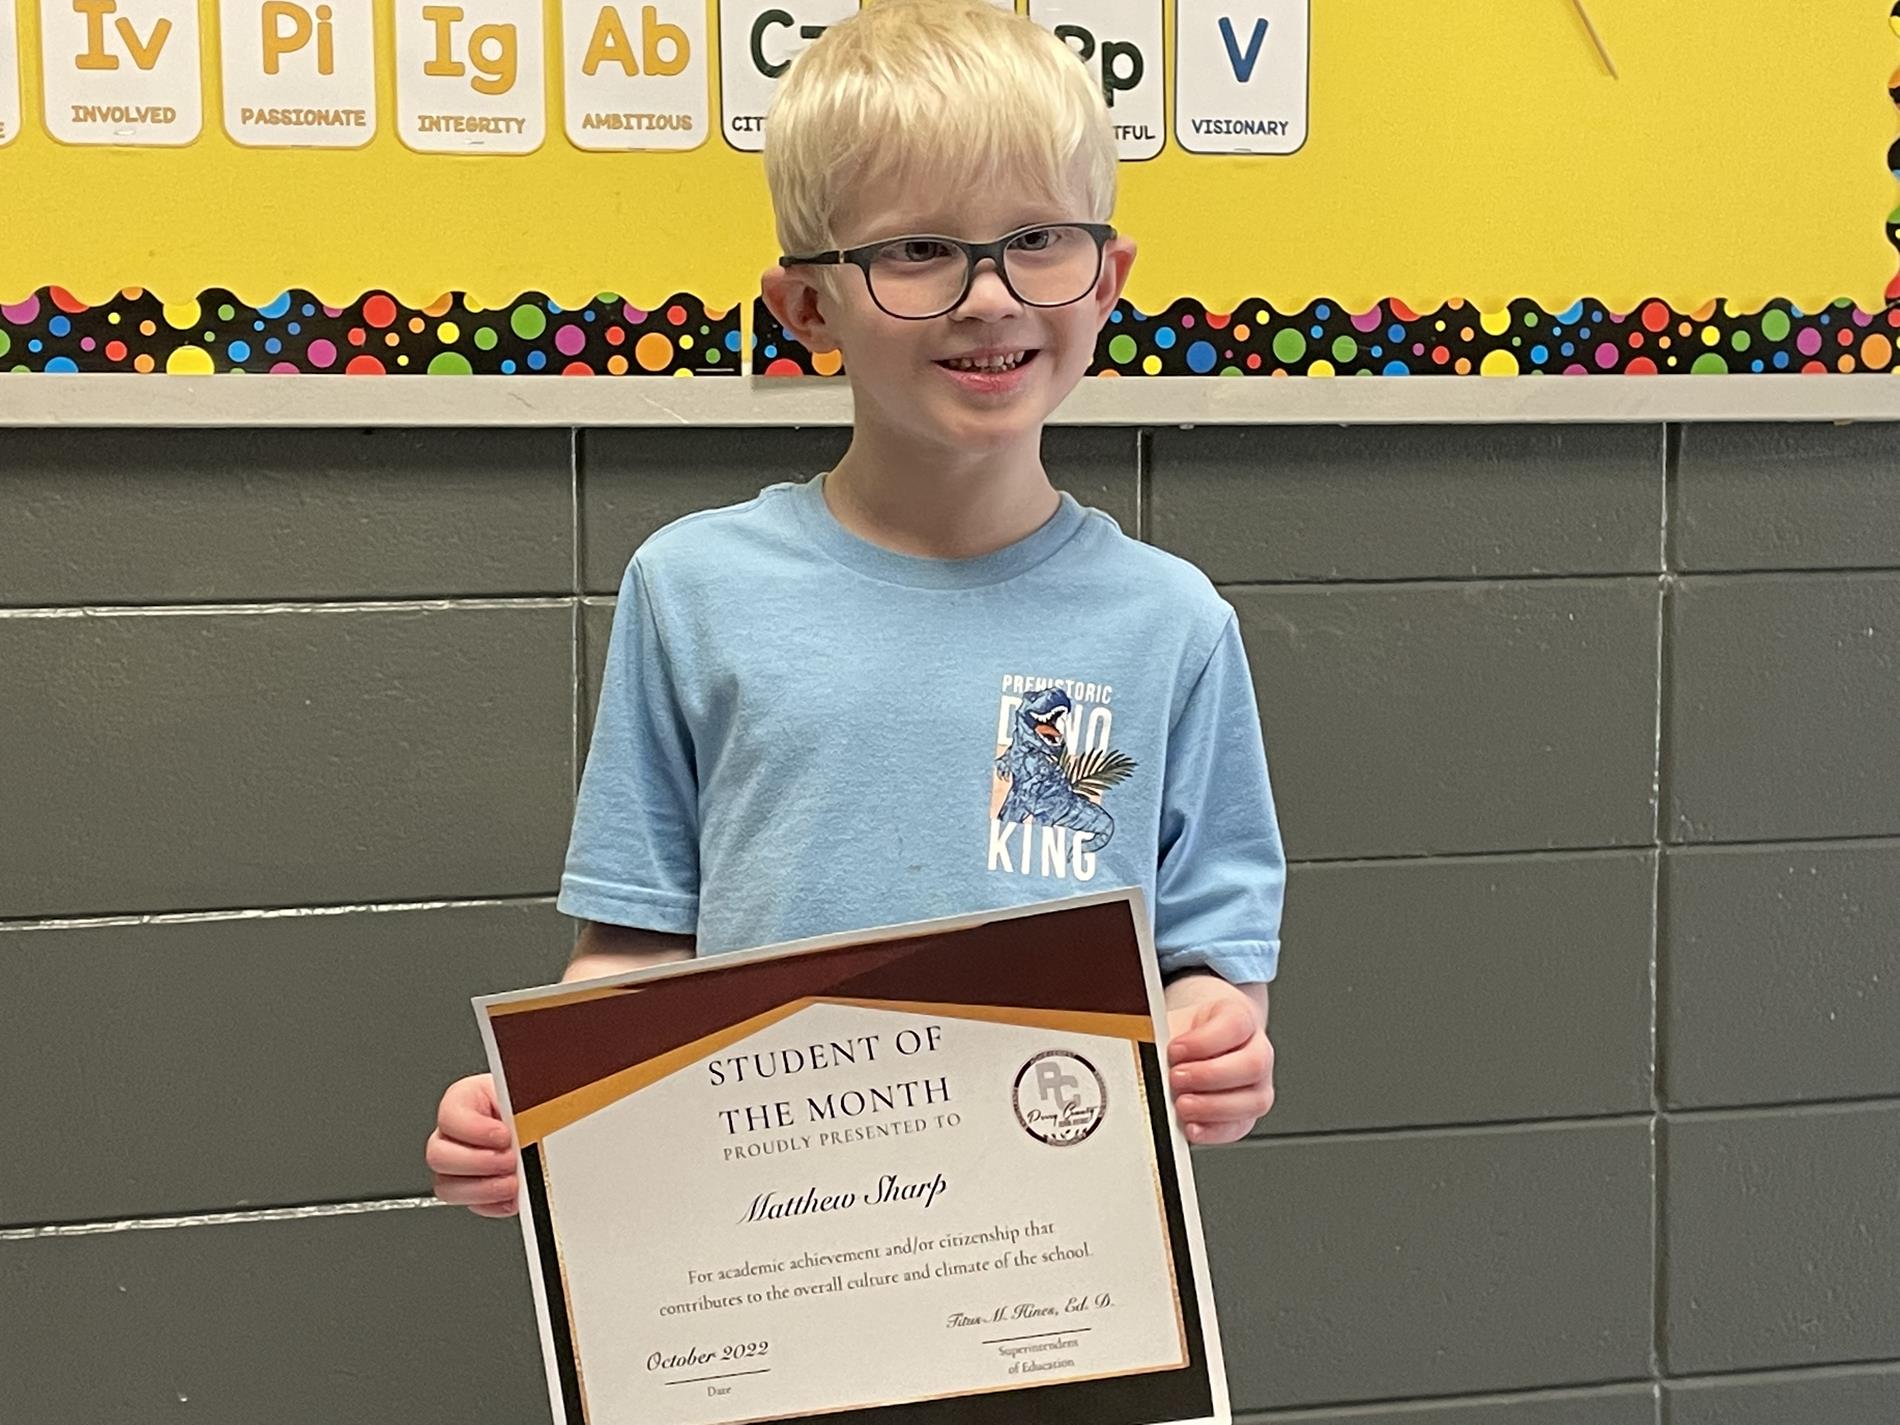 September Student of the Month